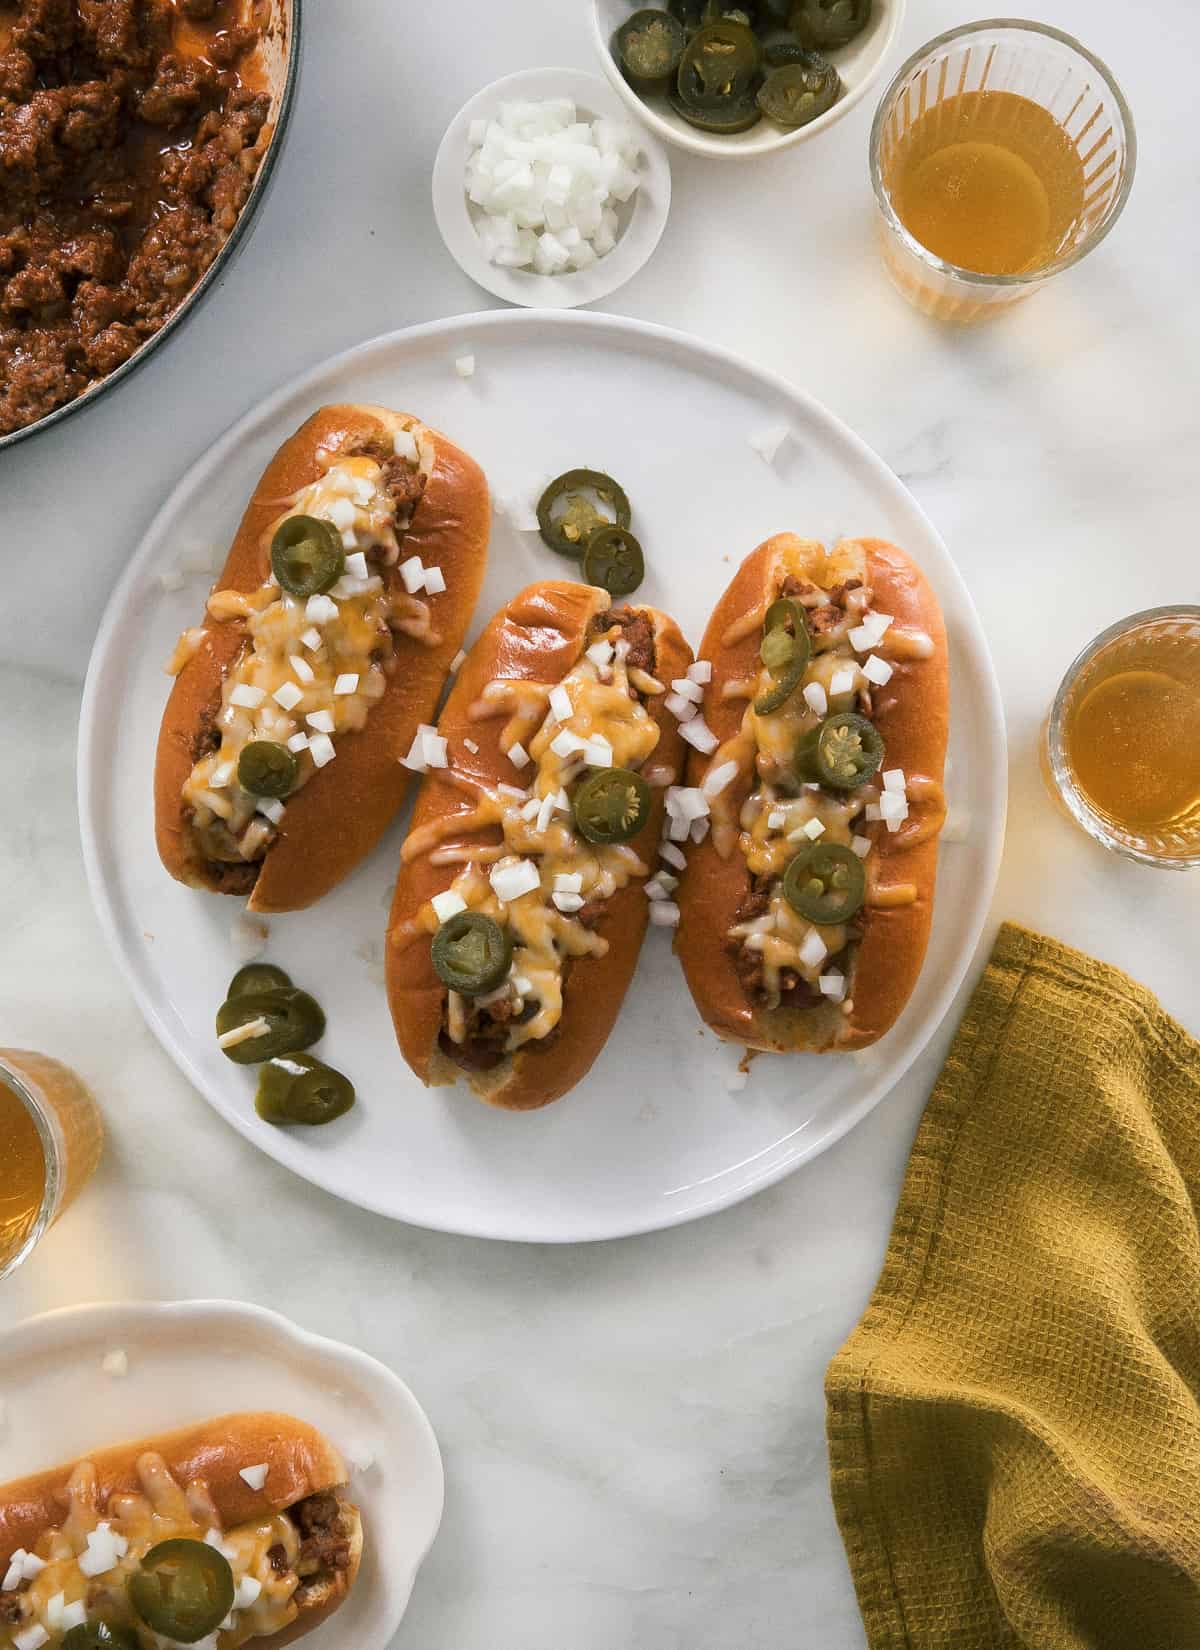 All melty chili cheese dogs with jalapeño and onion on top. 